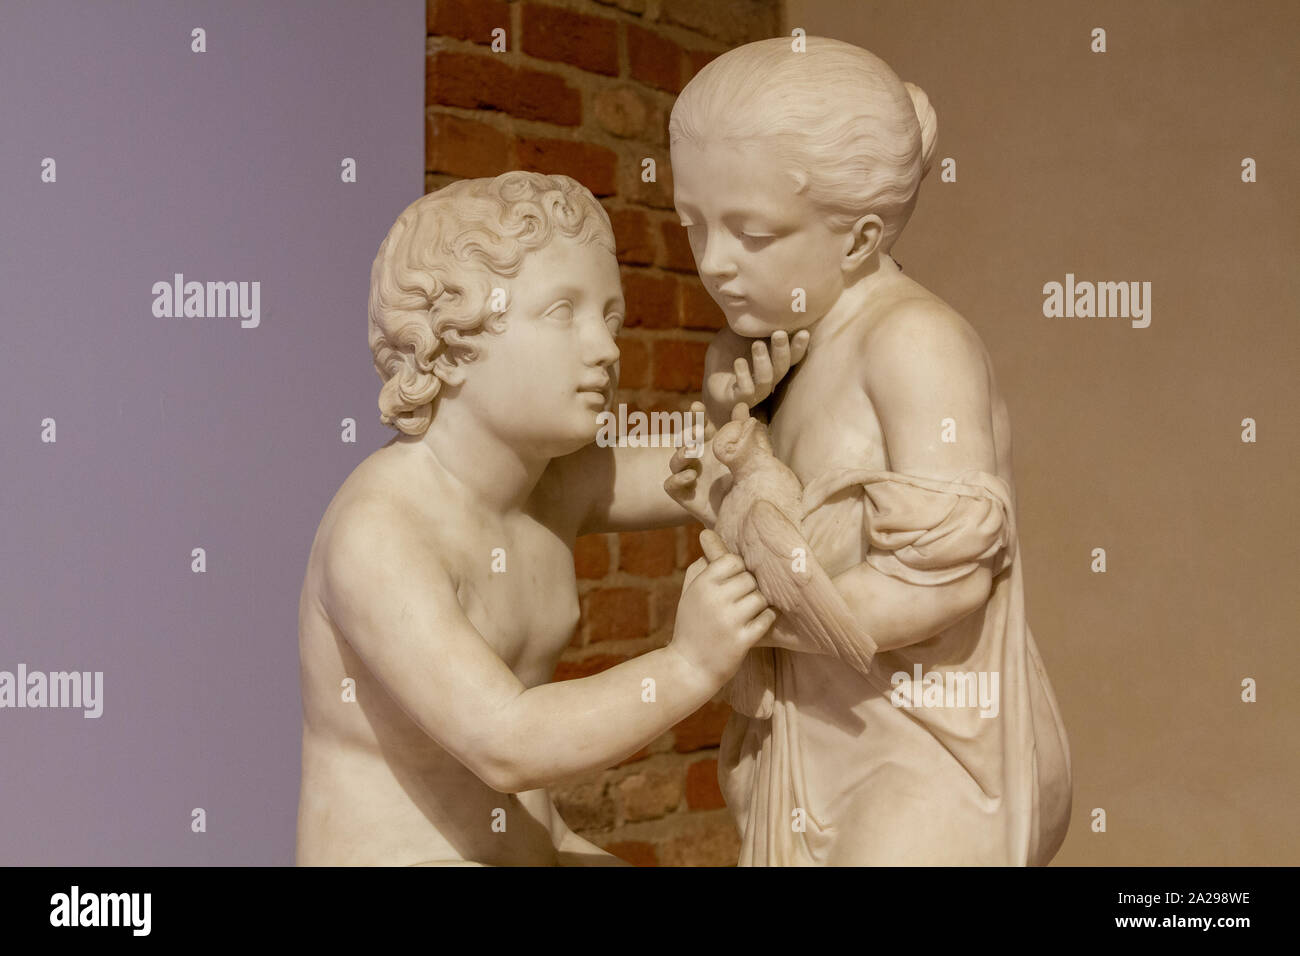 Innocence - a sculpture by Vincenzo Luccardi (1811-1876). Castello Visconteo Museum in Pavia, Italy. Stock Photo